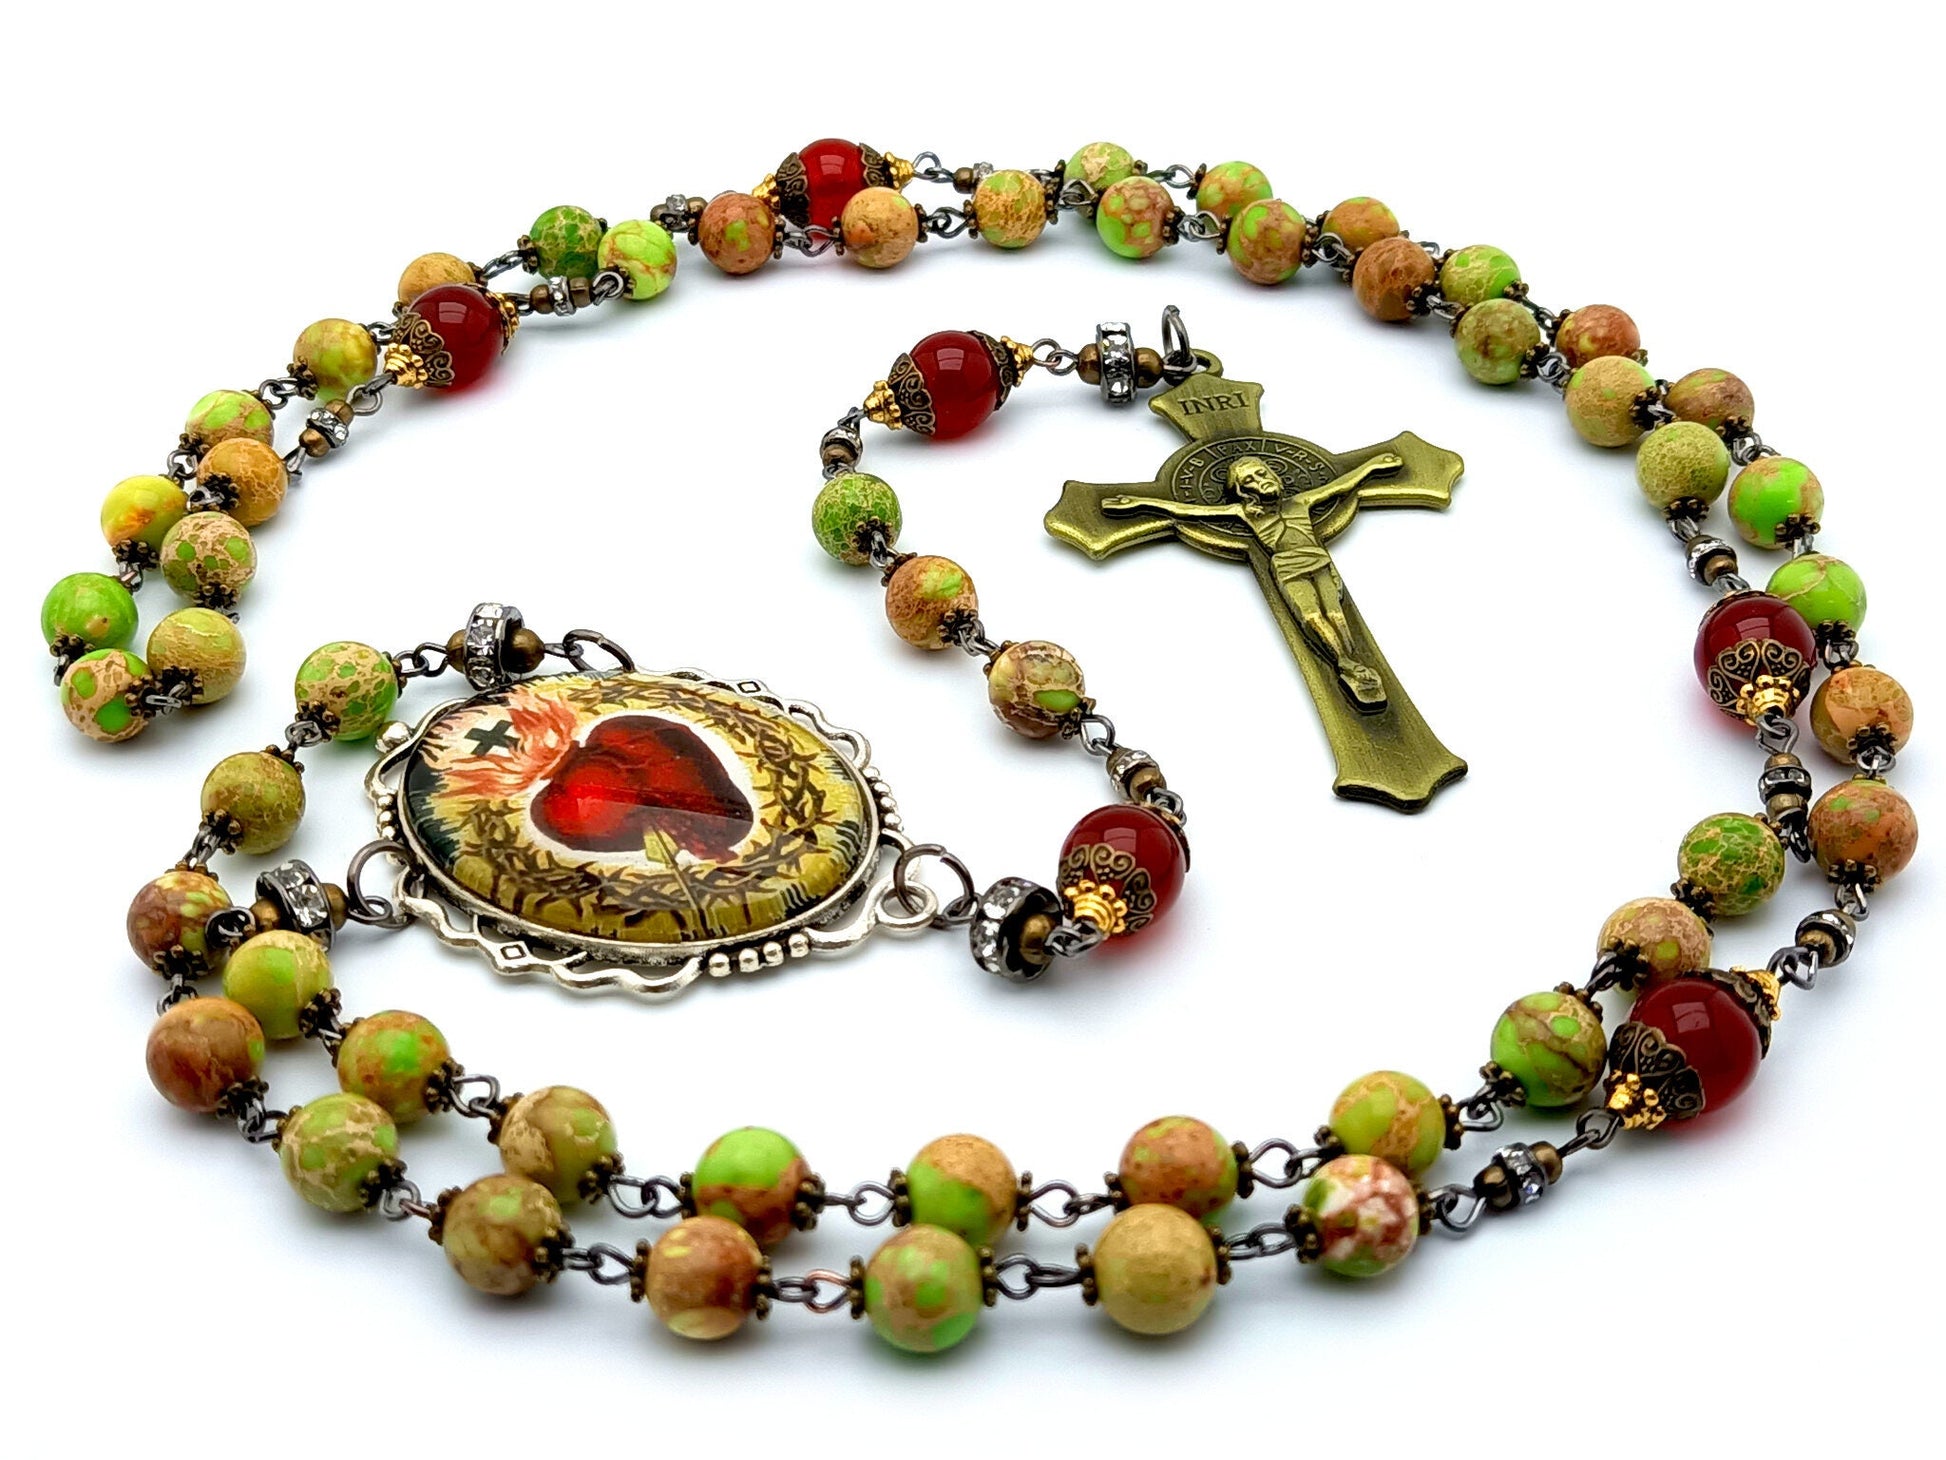 Sacred Heart of Jesus unique rosary beads with green jasper gemstone and ruby precious stone beads, brass Saint Benedict crucifix and large picture centre medal.